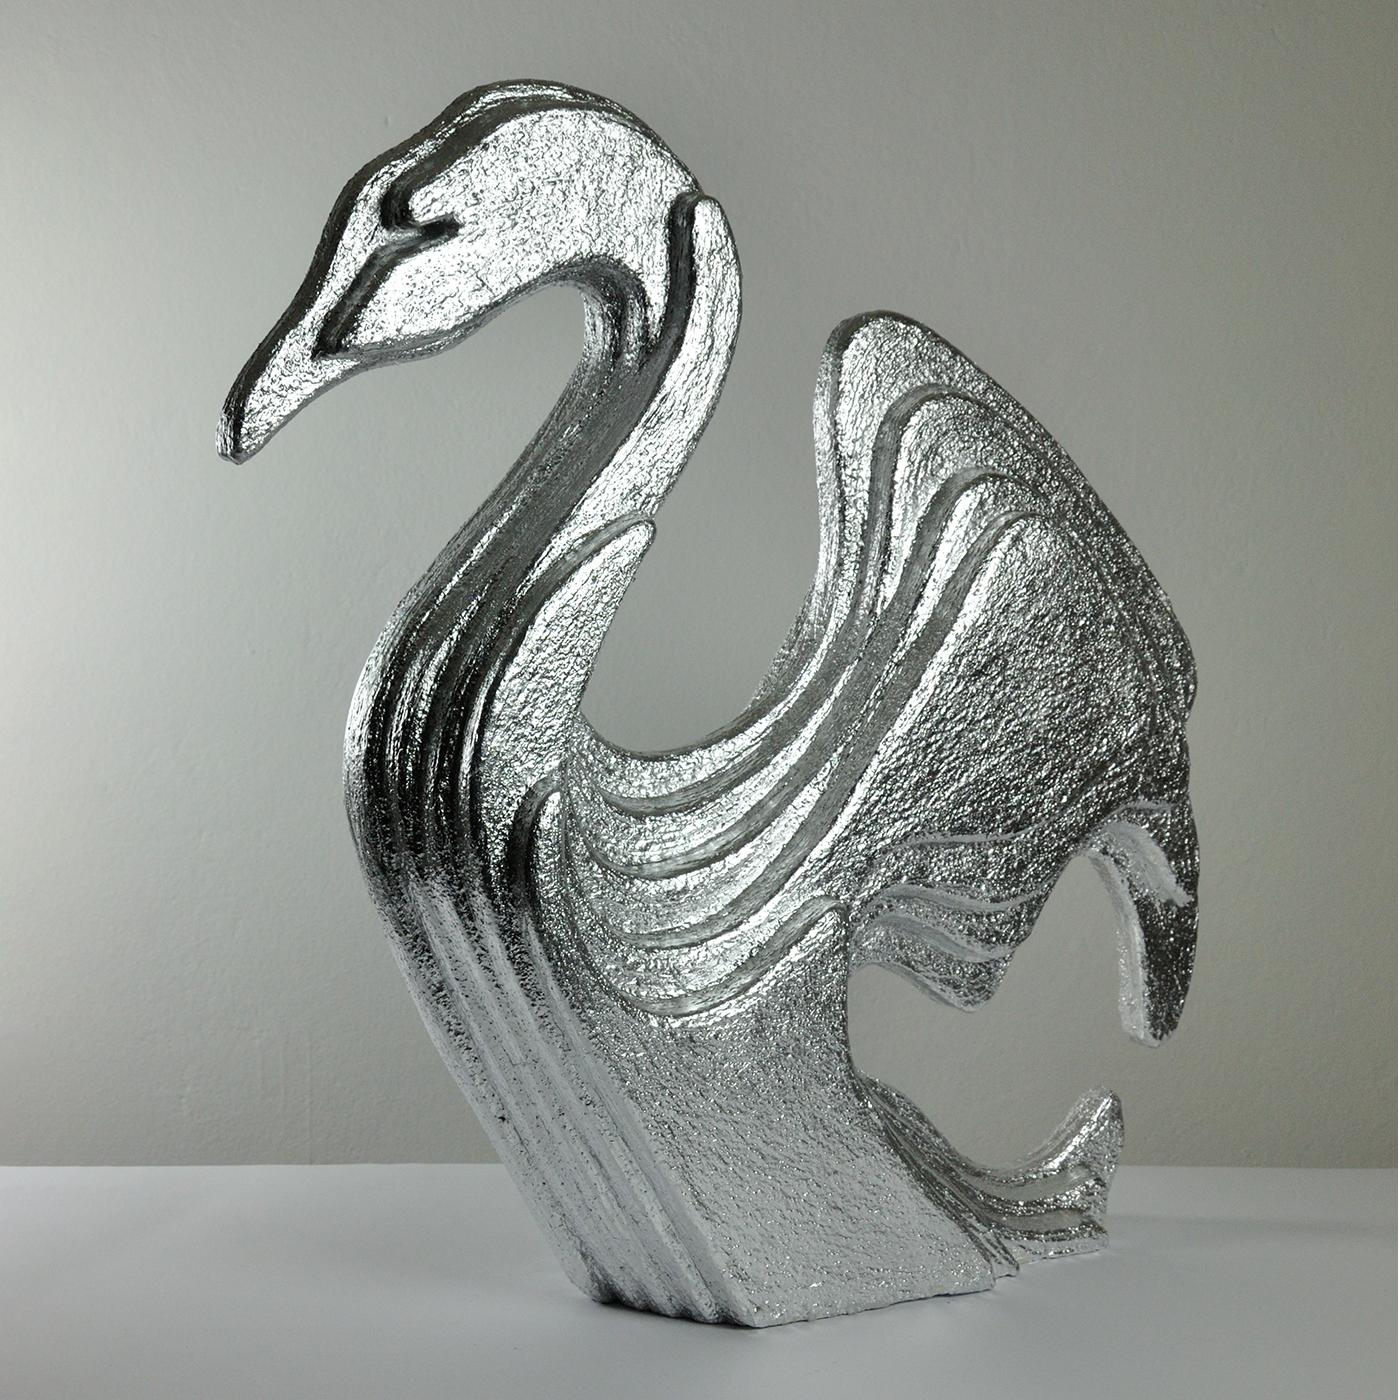 A layered design preciously covered in silver leaf and sinuous, stylized contours mark the sublime silhouette of this artful sculpture shaped like an elegant swan. Finished with plaster applied in relief, it is deftly crafted from extruded